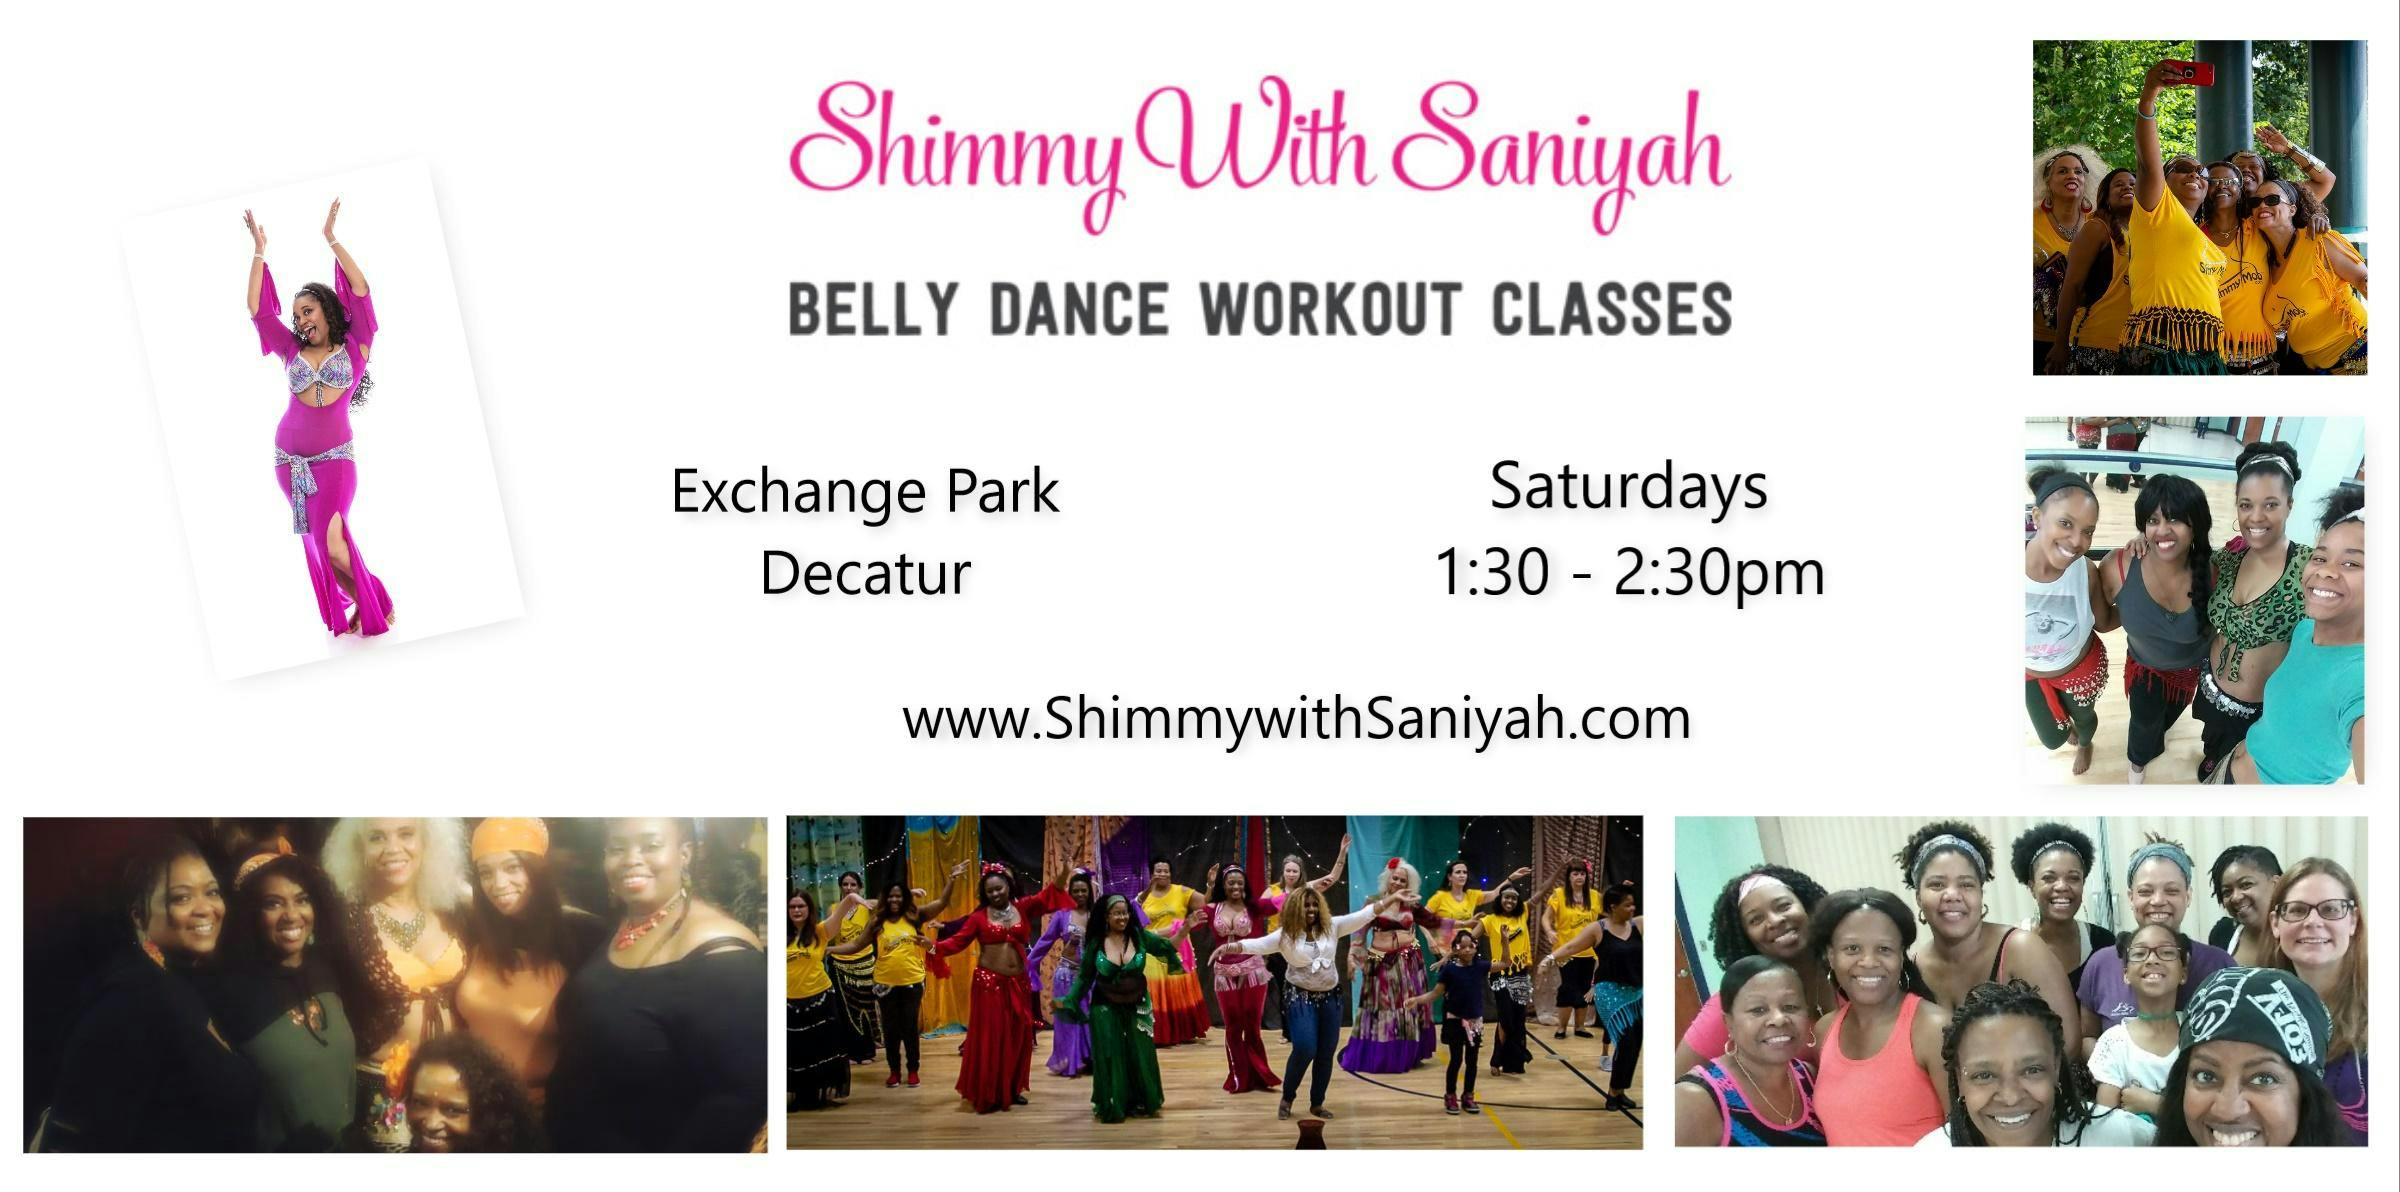 Shimmy with Saniyah Belly Dance Workout Classes - Exchange Park - Decatur